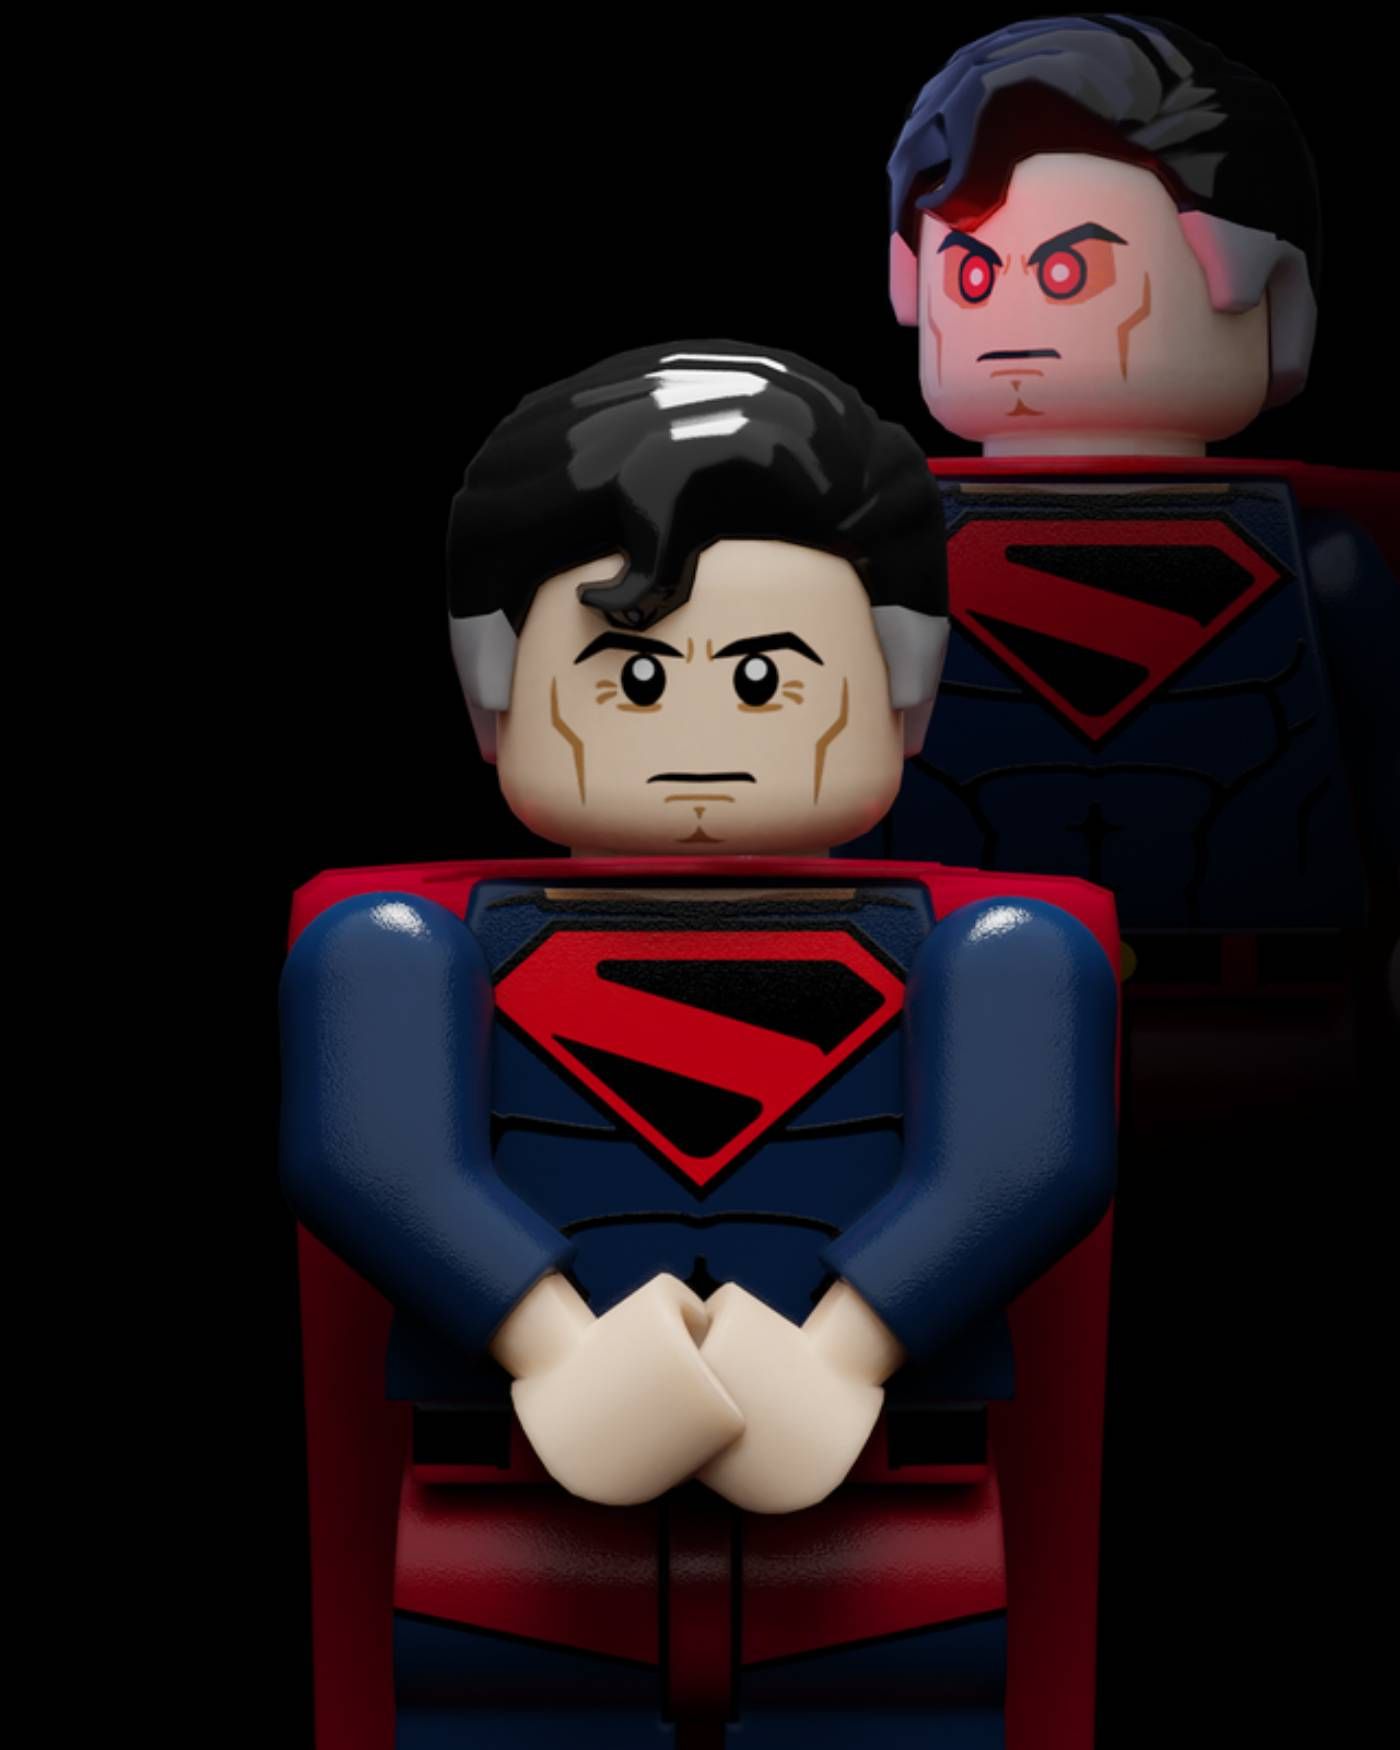 DC’s Kingdom Come Gets Awesome LEGO Fan Tribute For 25th Anniversary